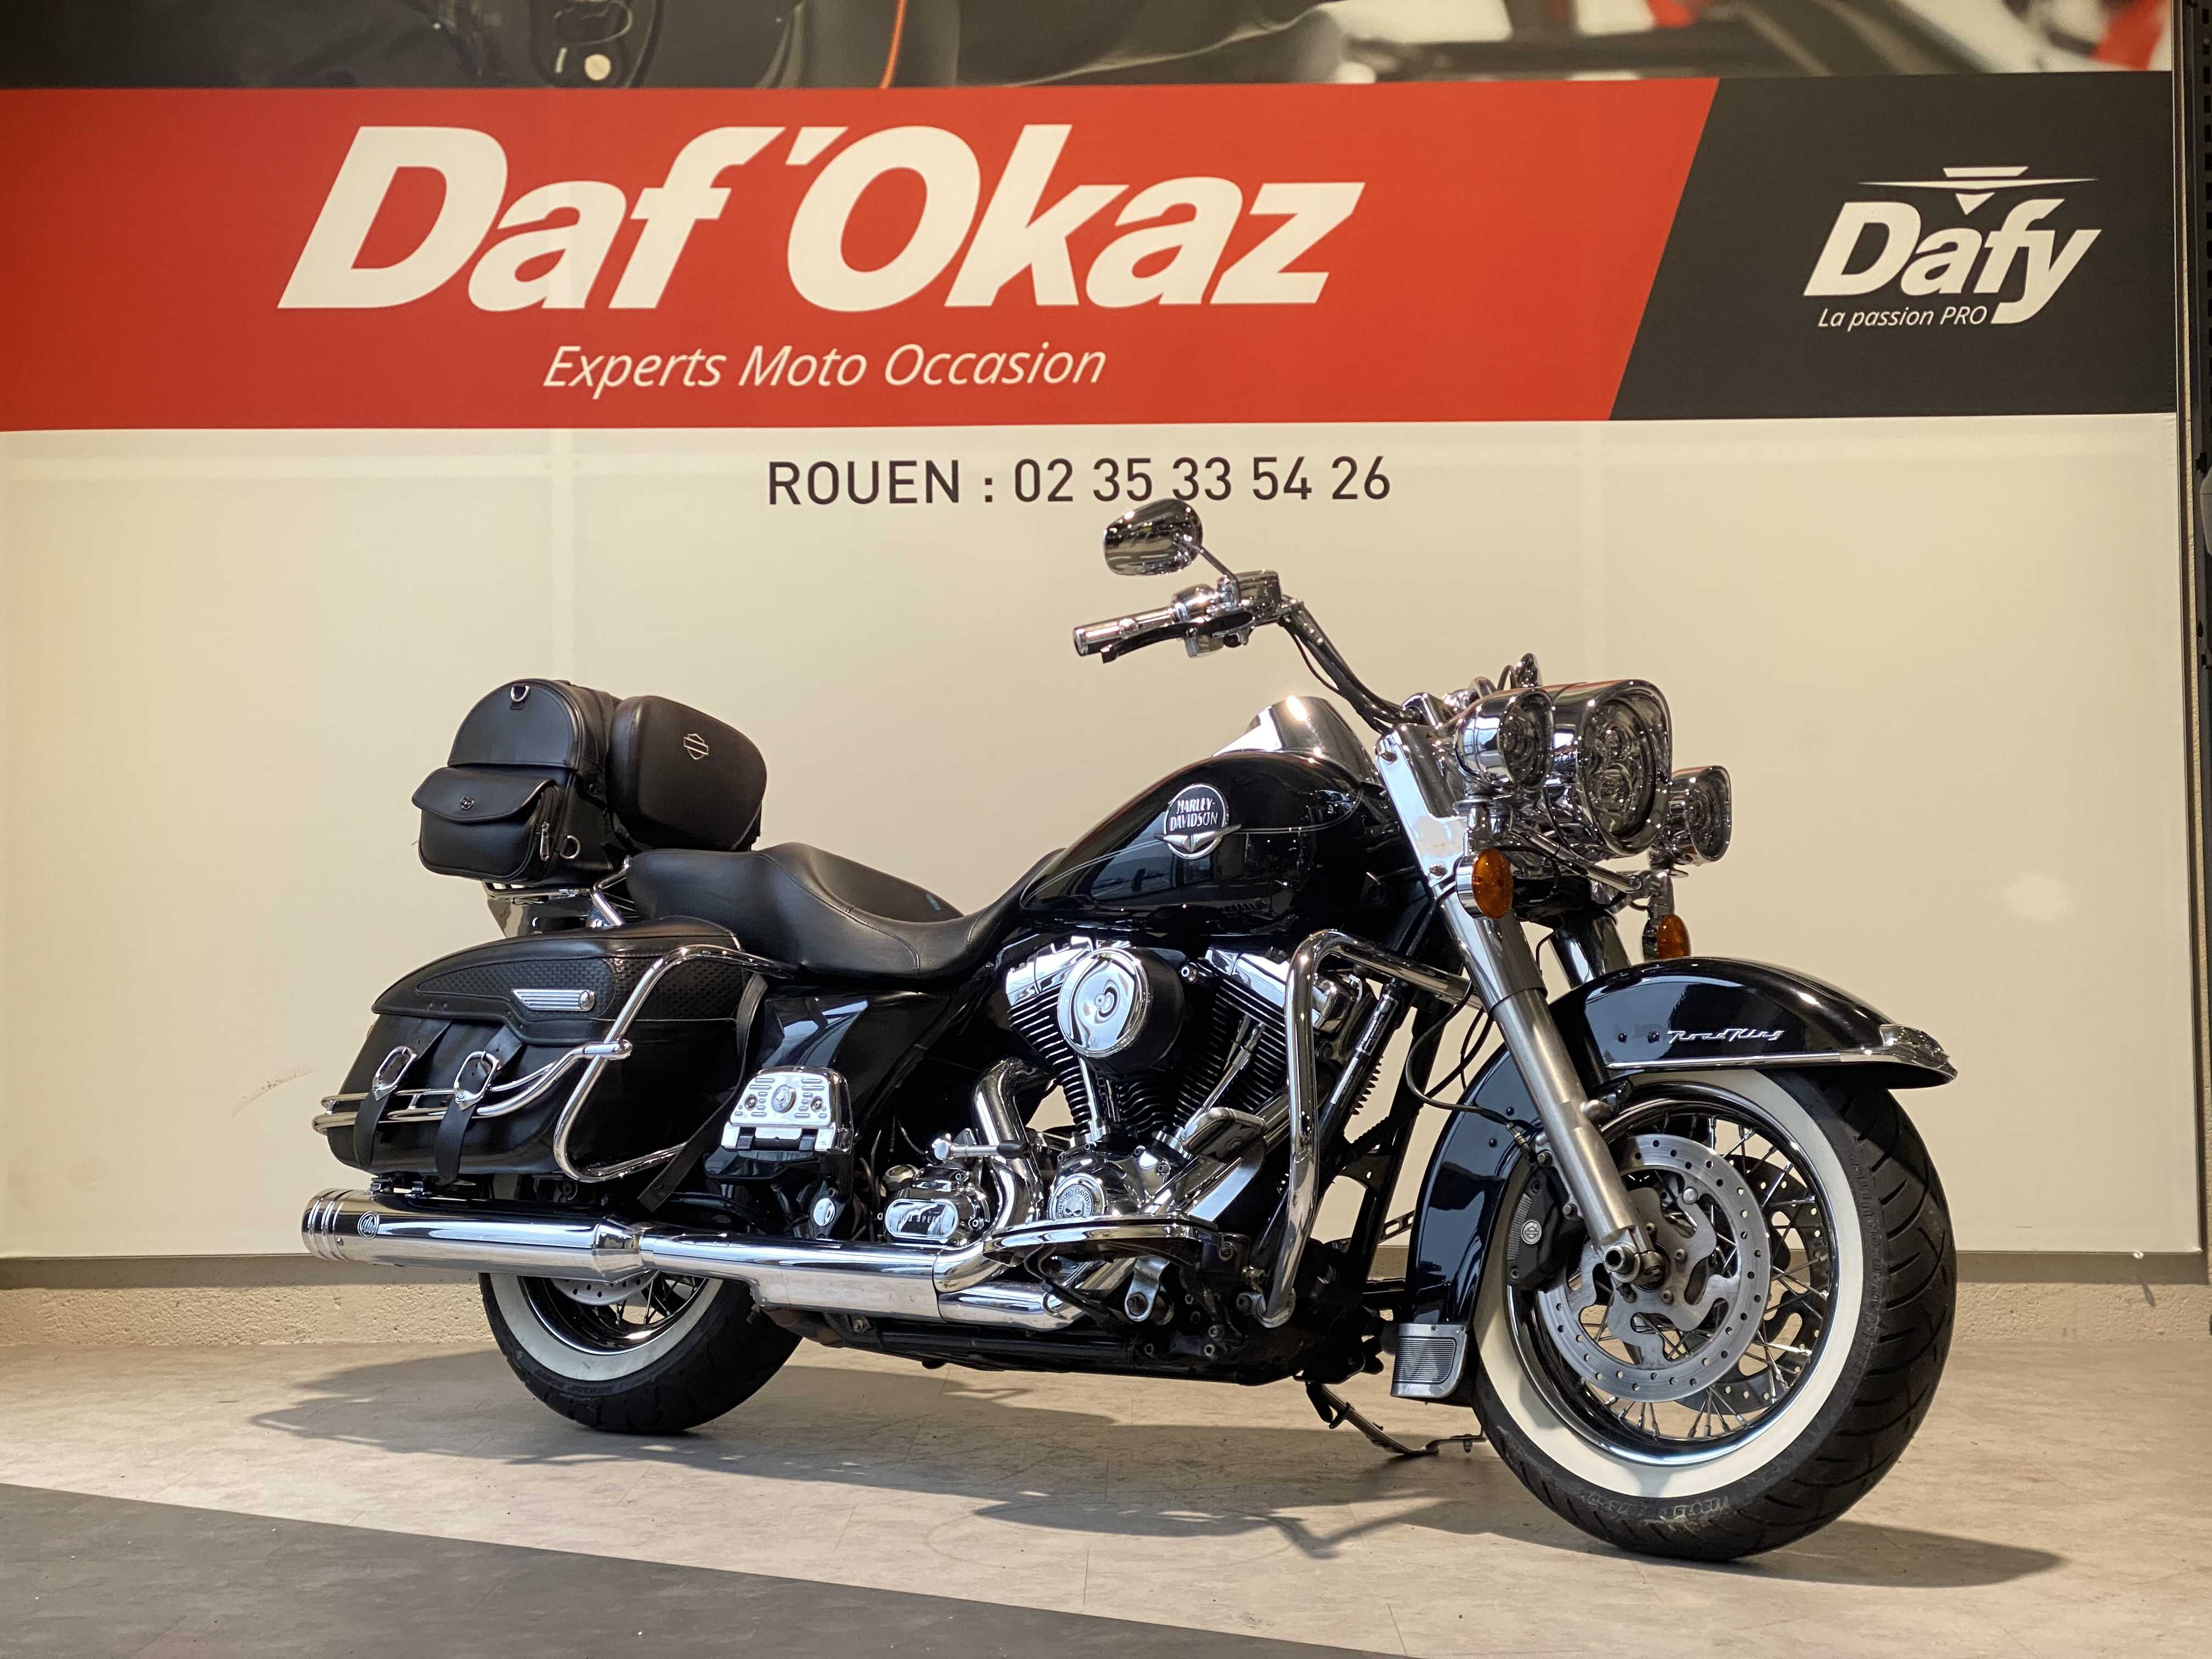 Harley-Davidson ROAD KING CLASSIC TOURING 2010 HD vue 3/4 droite